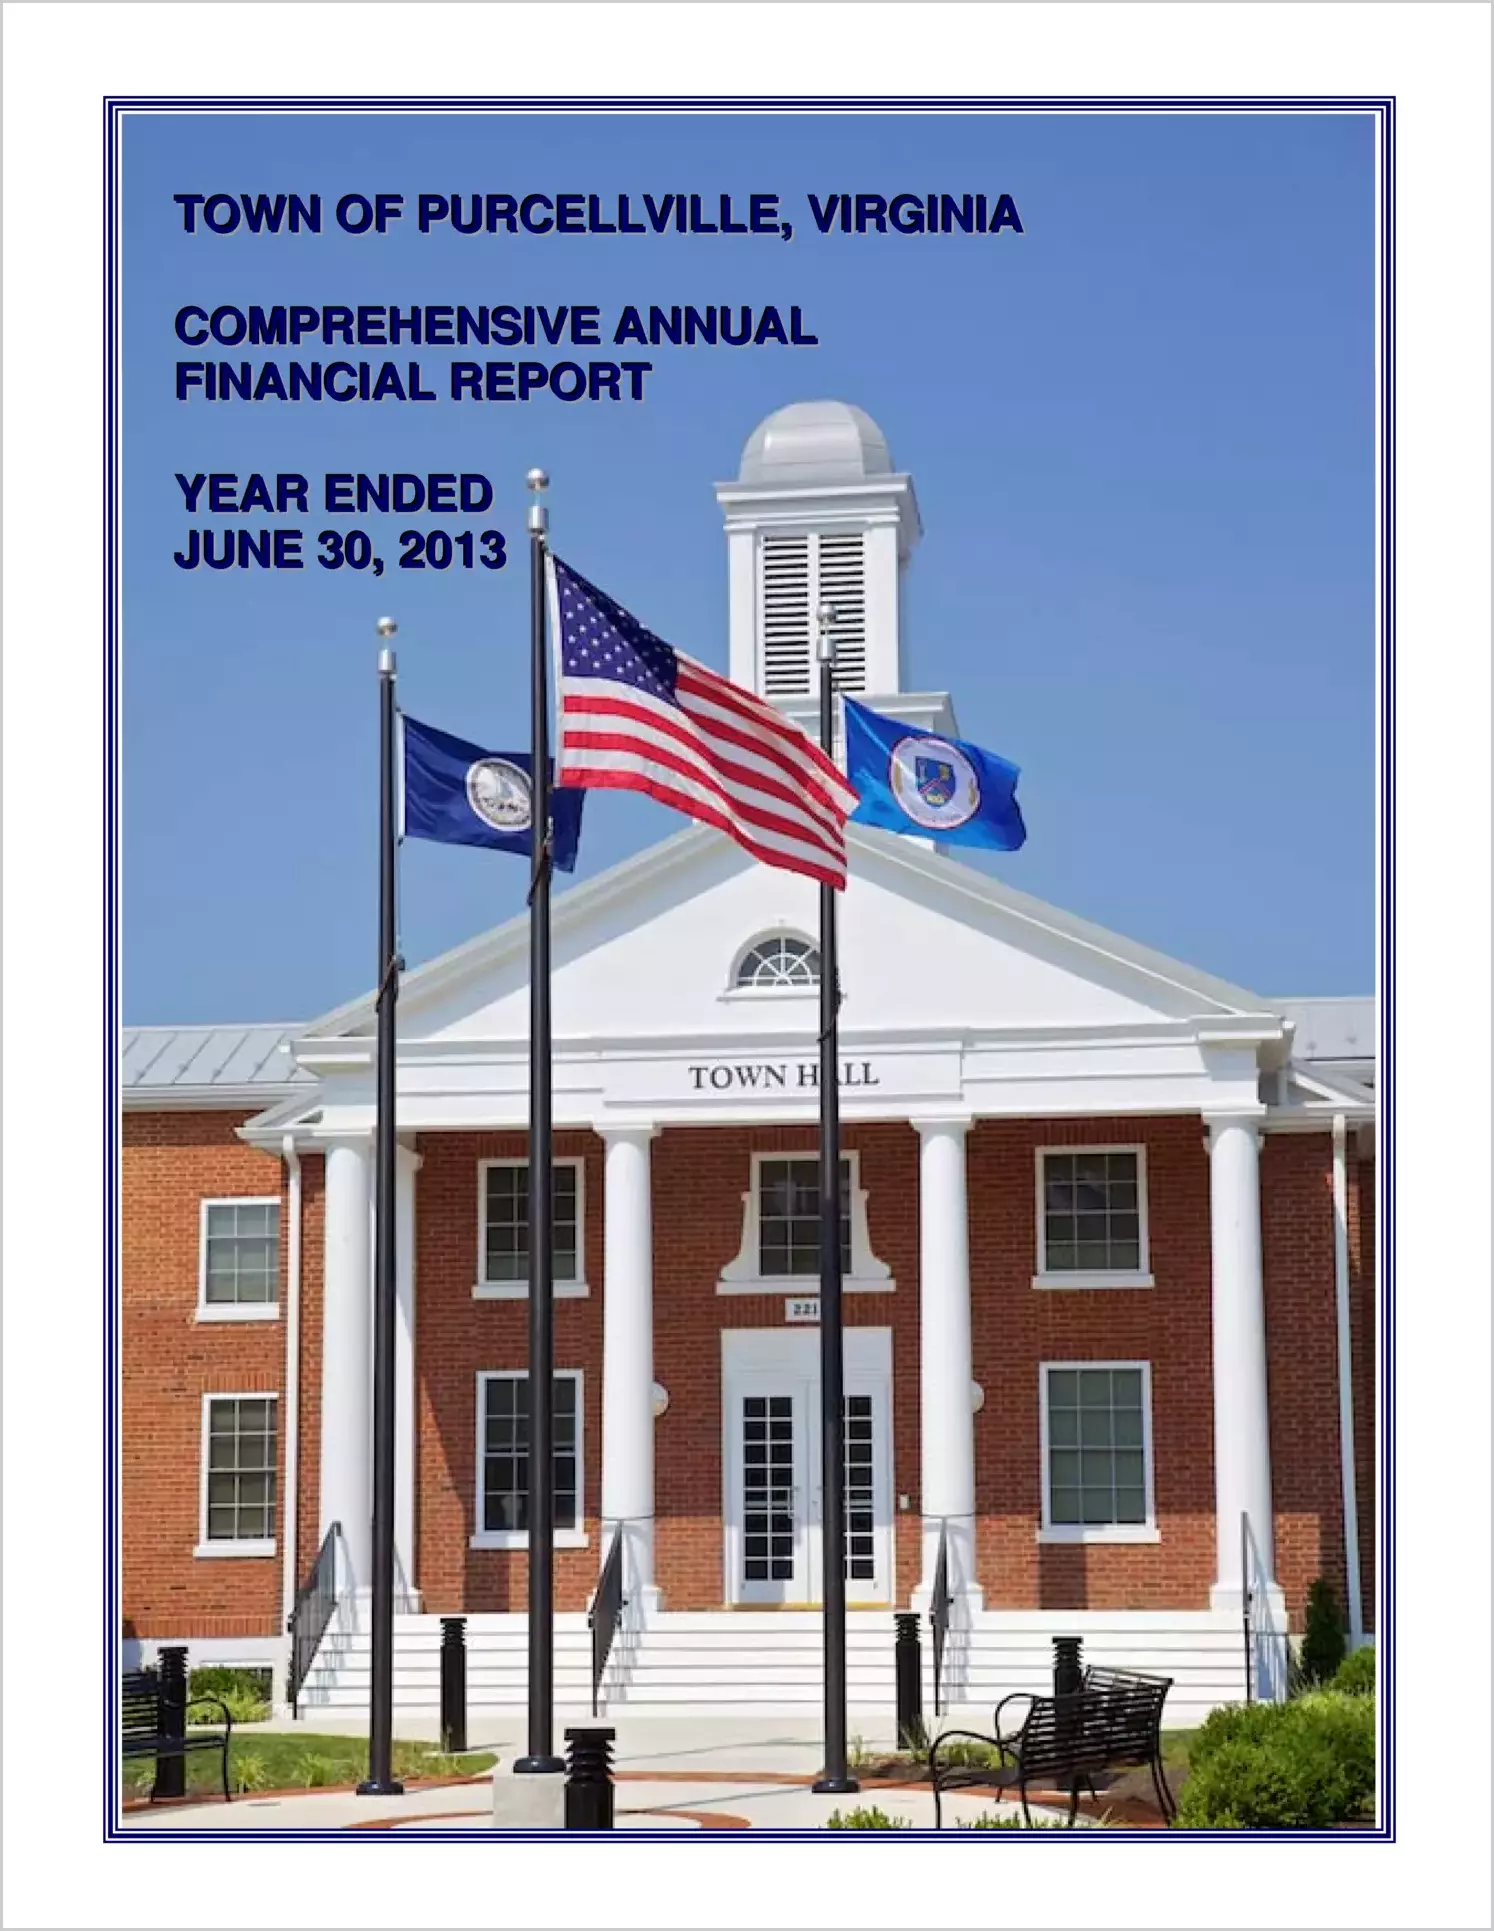 2013 Annual Financial Report for Town of Purcellville